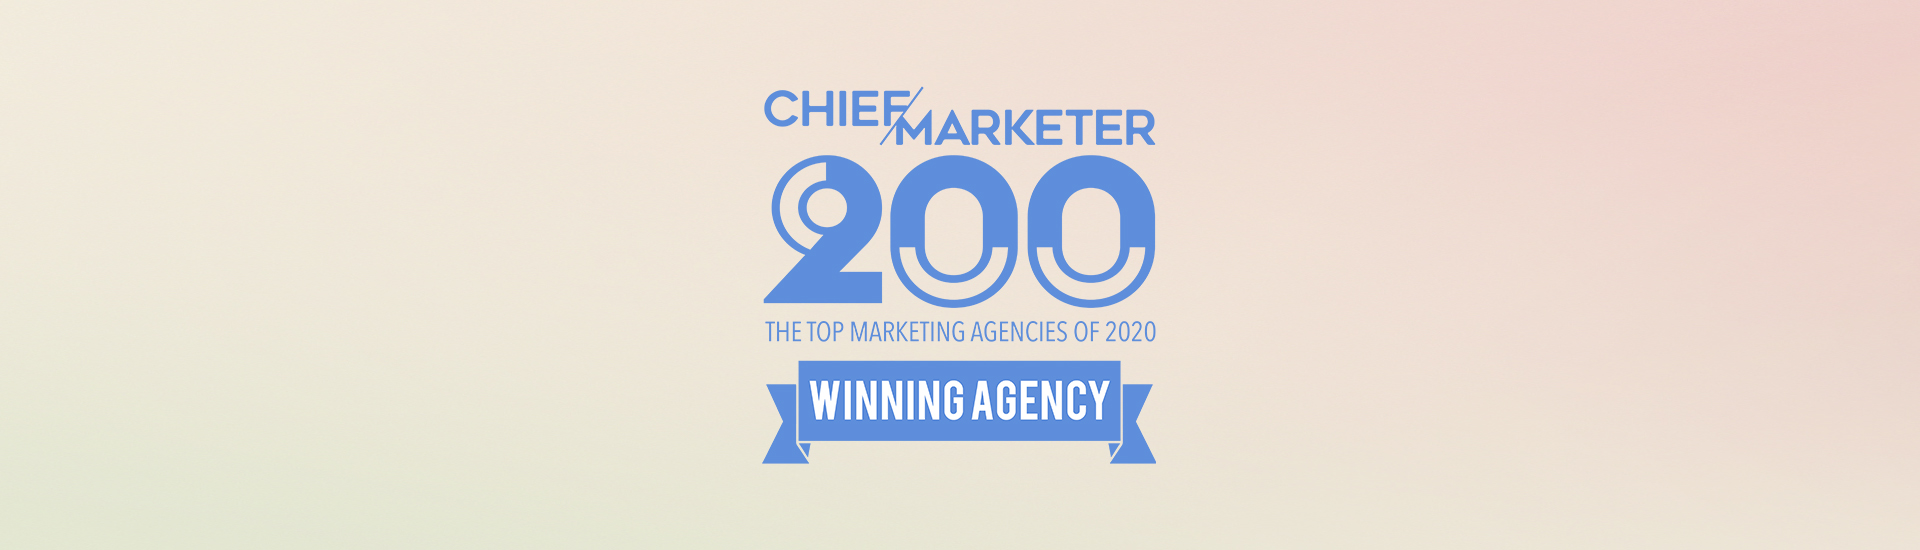 Chief Marketer Recognizes Vye as a Top Agency